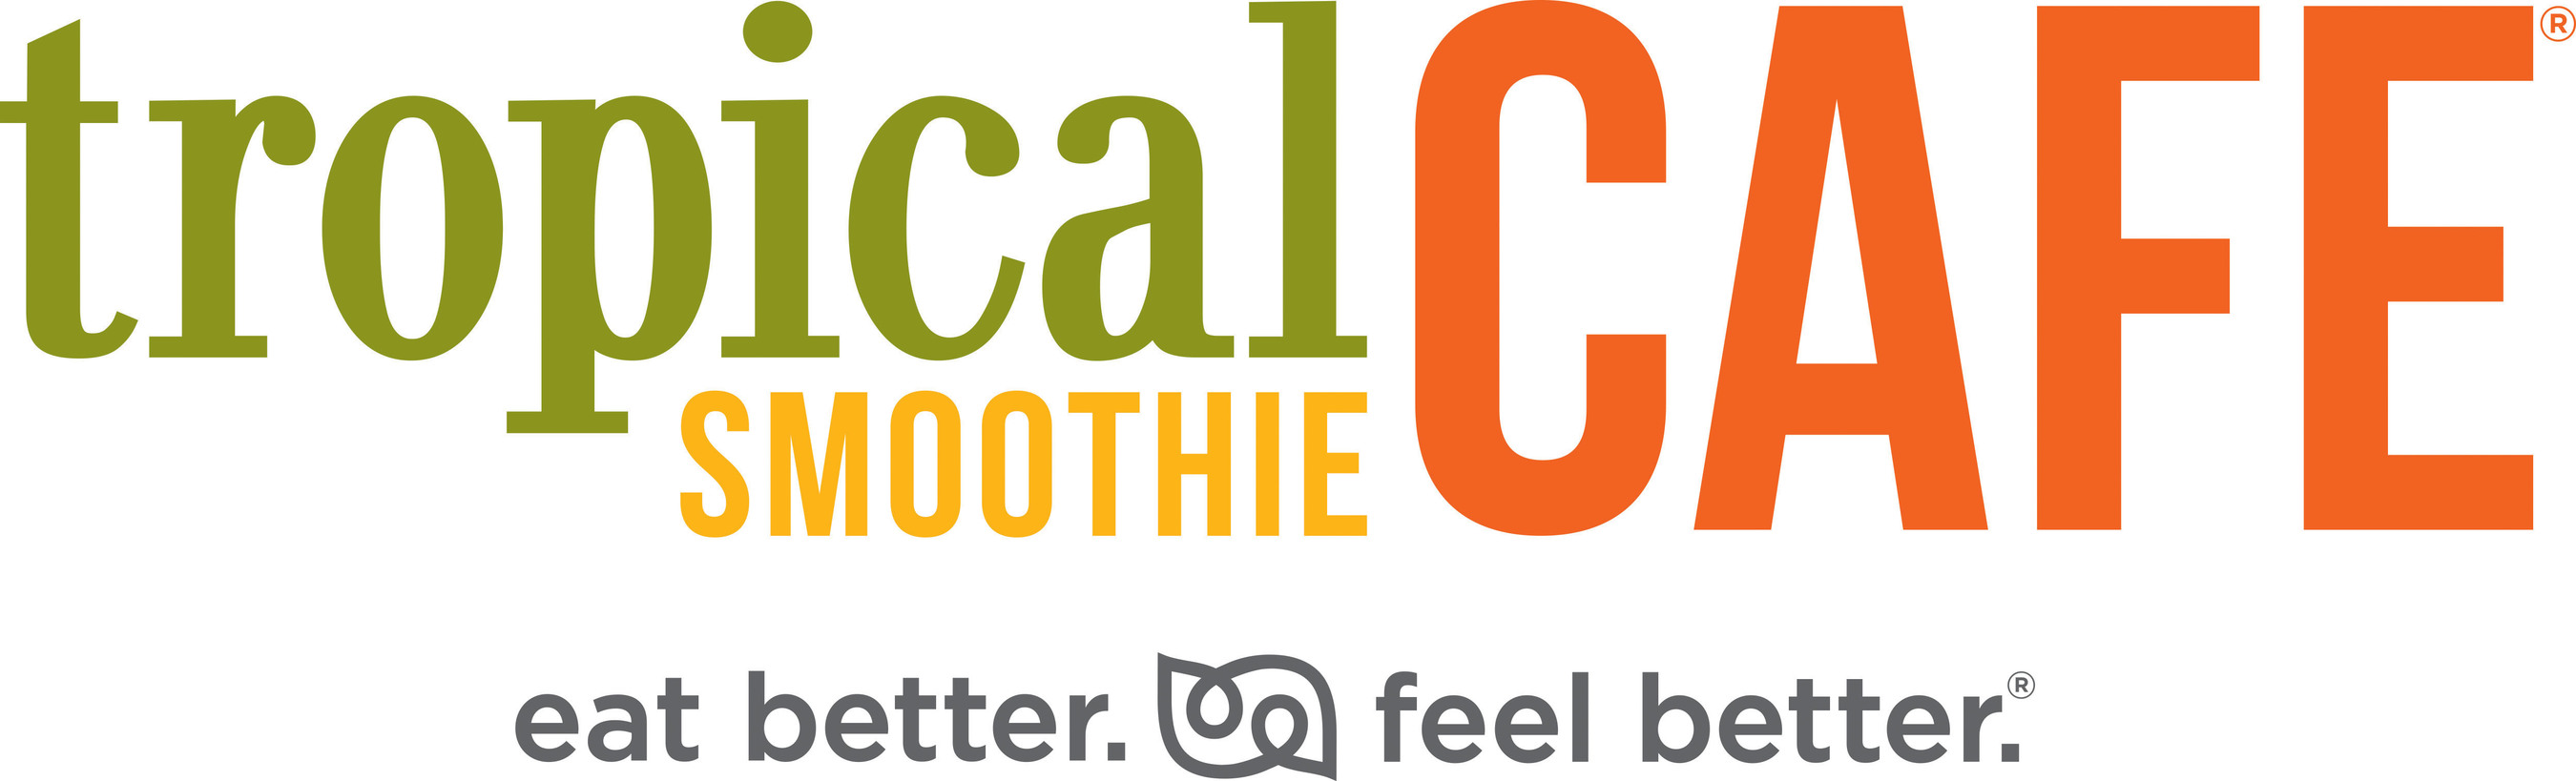 Tropical Smoothie Cafe Announces Highest Average Unit Volume In 18-year  History